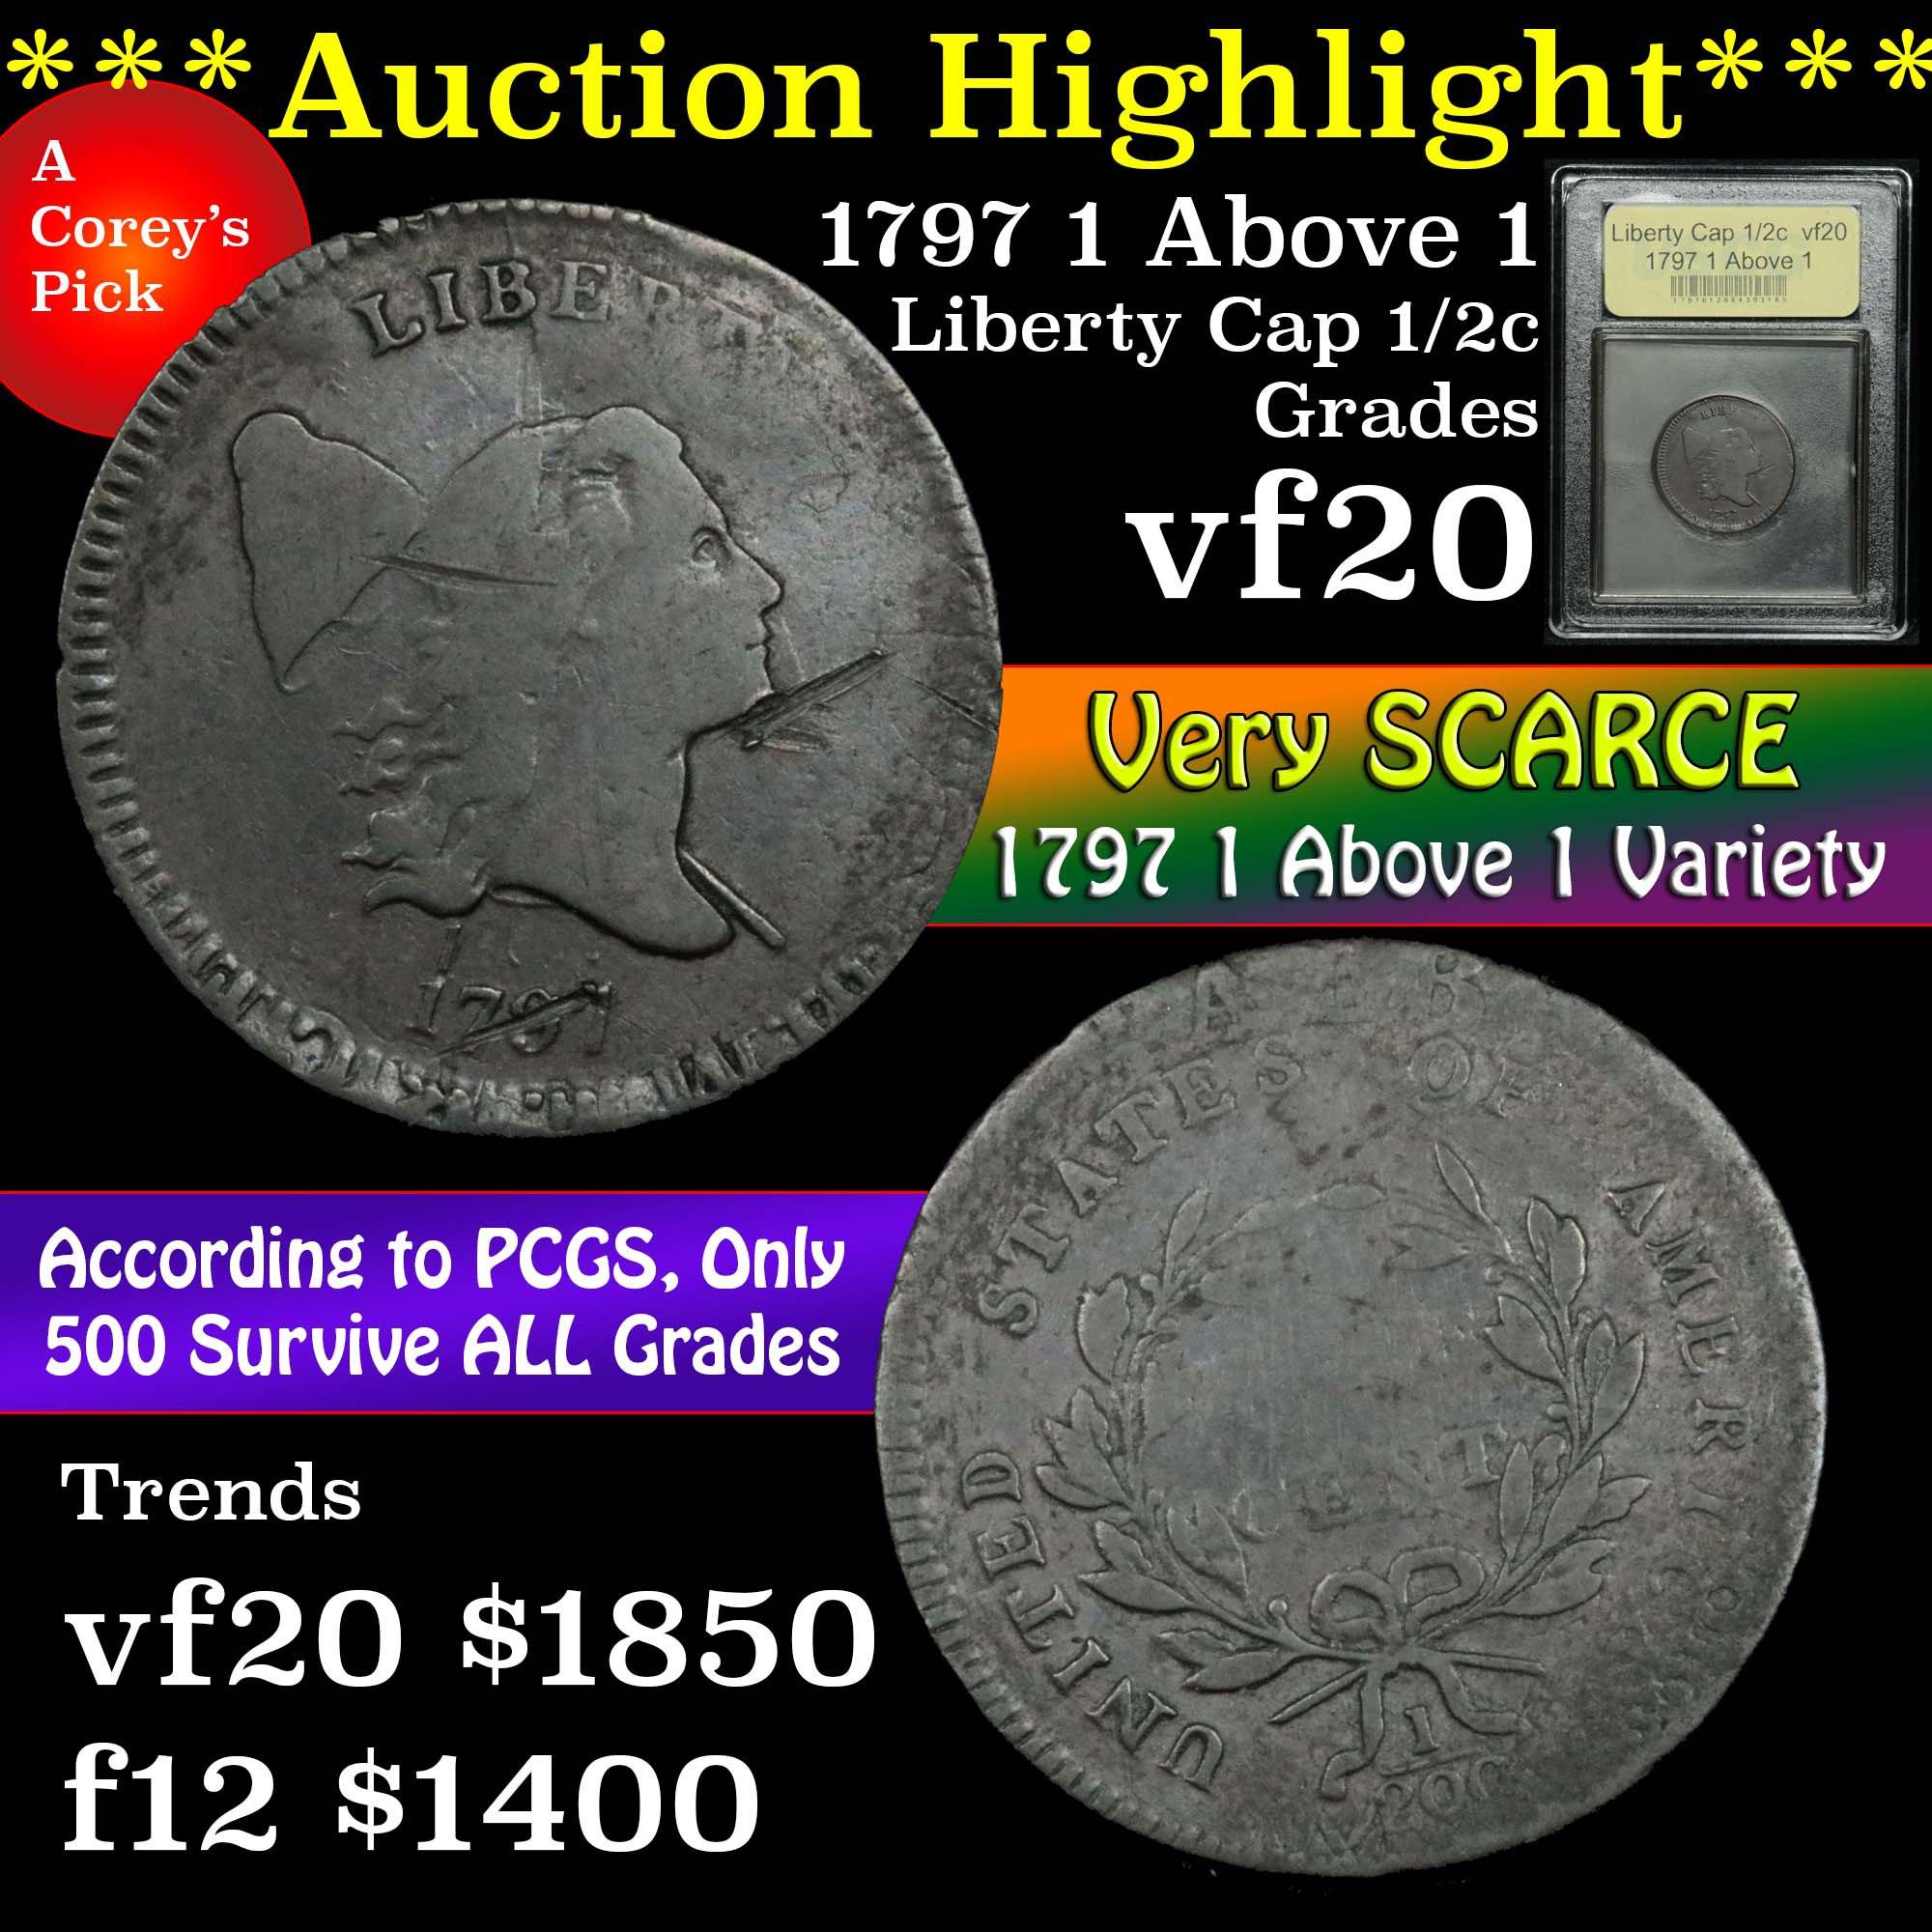 ***Auction Highlight*** 1797 1 Above 1 Liberty Cap Half Cent 1/2c Graded vf, very fine by USCG (fc)